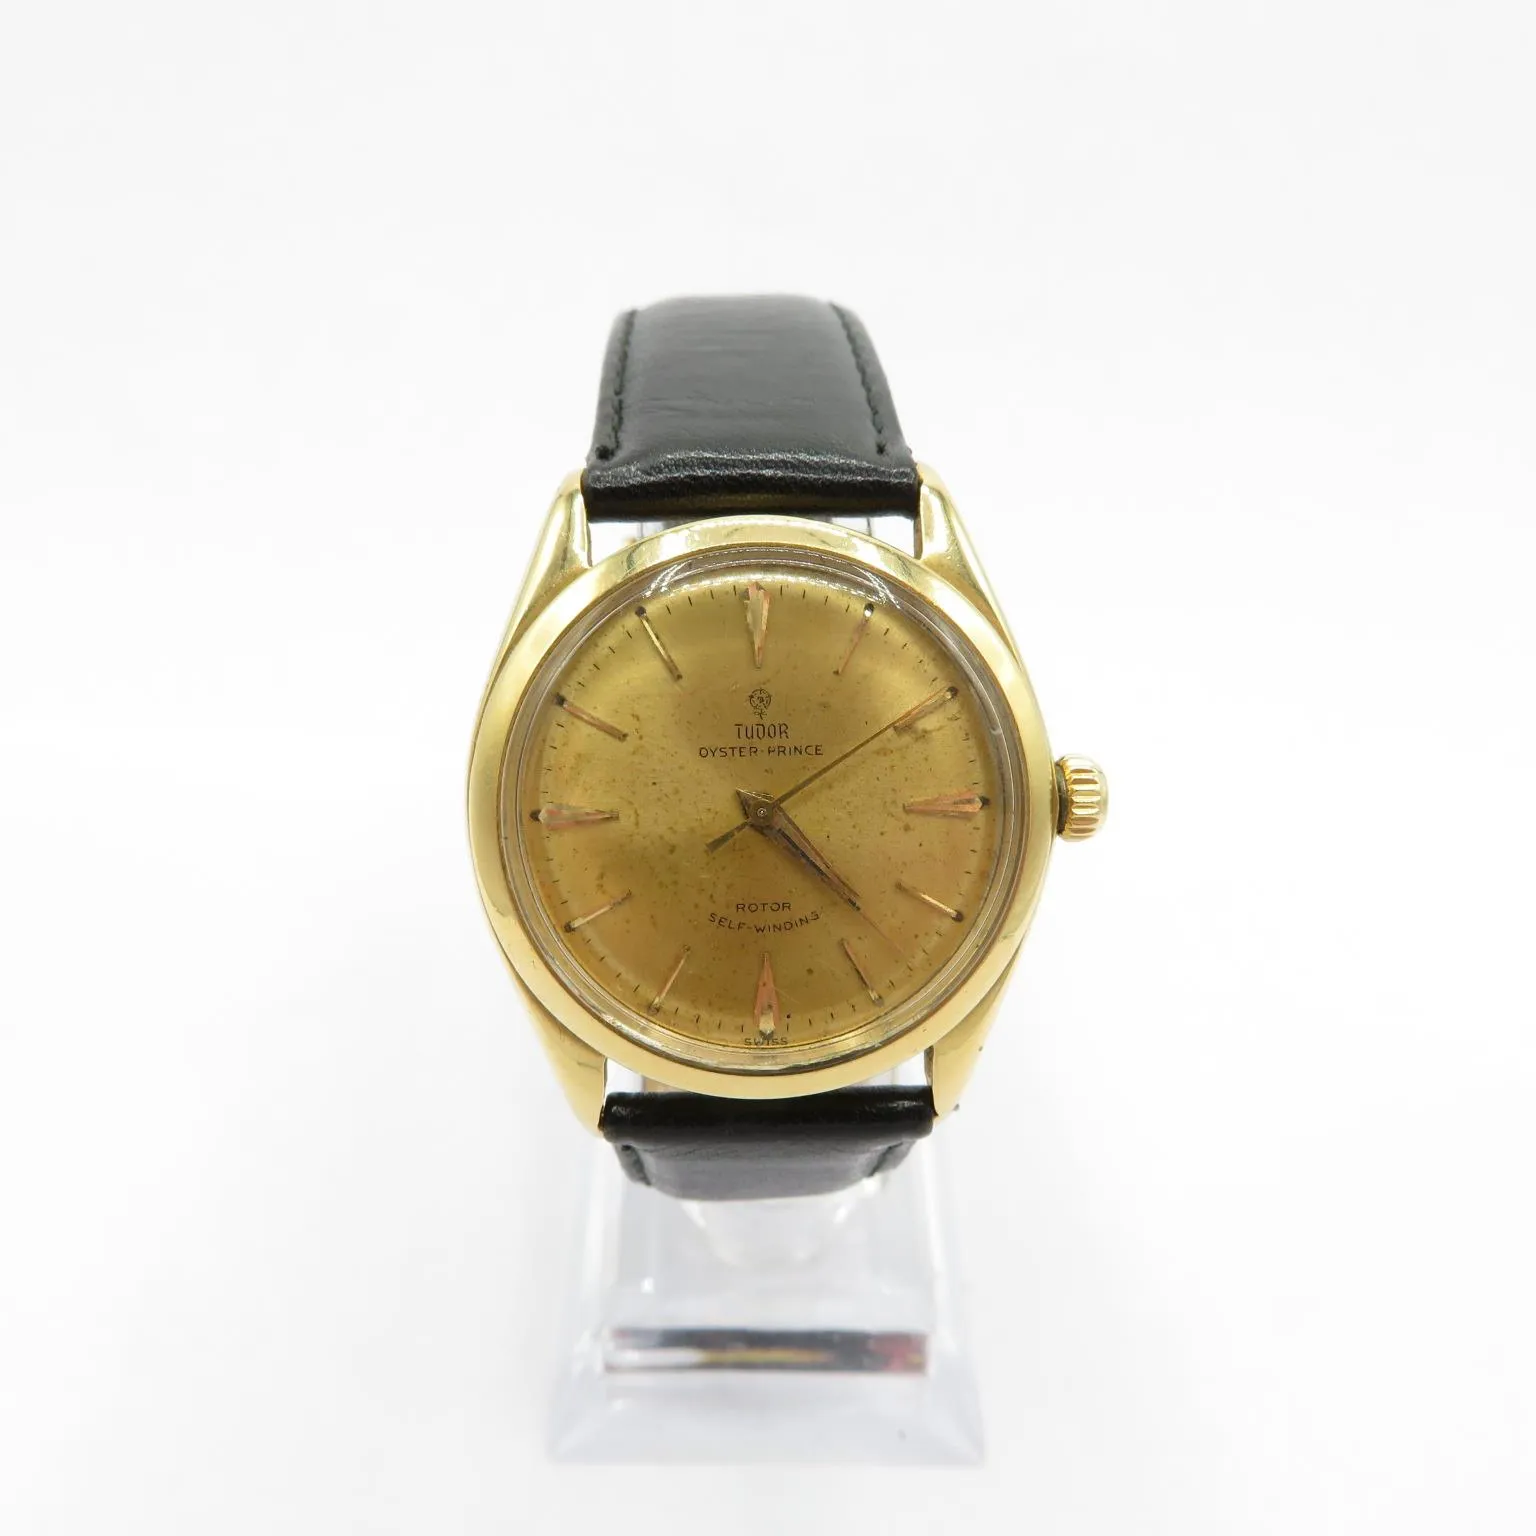 Tudor Oyster Prince 7965 nullmm Yellow gold